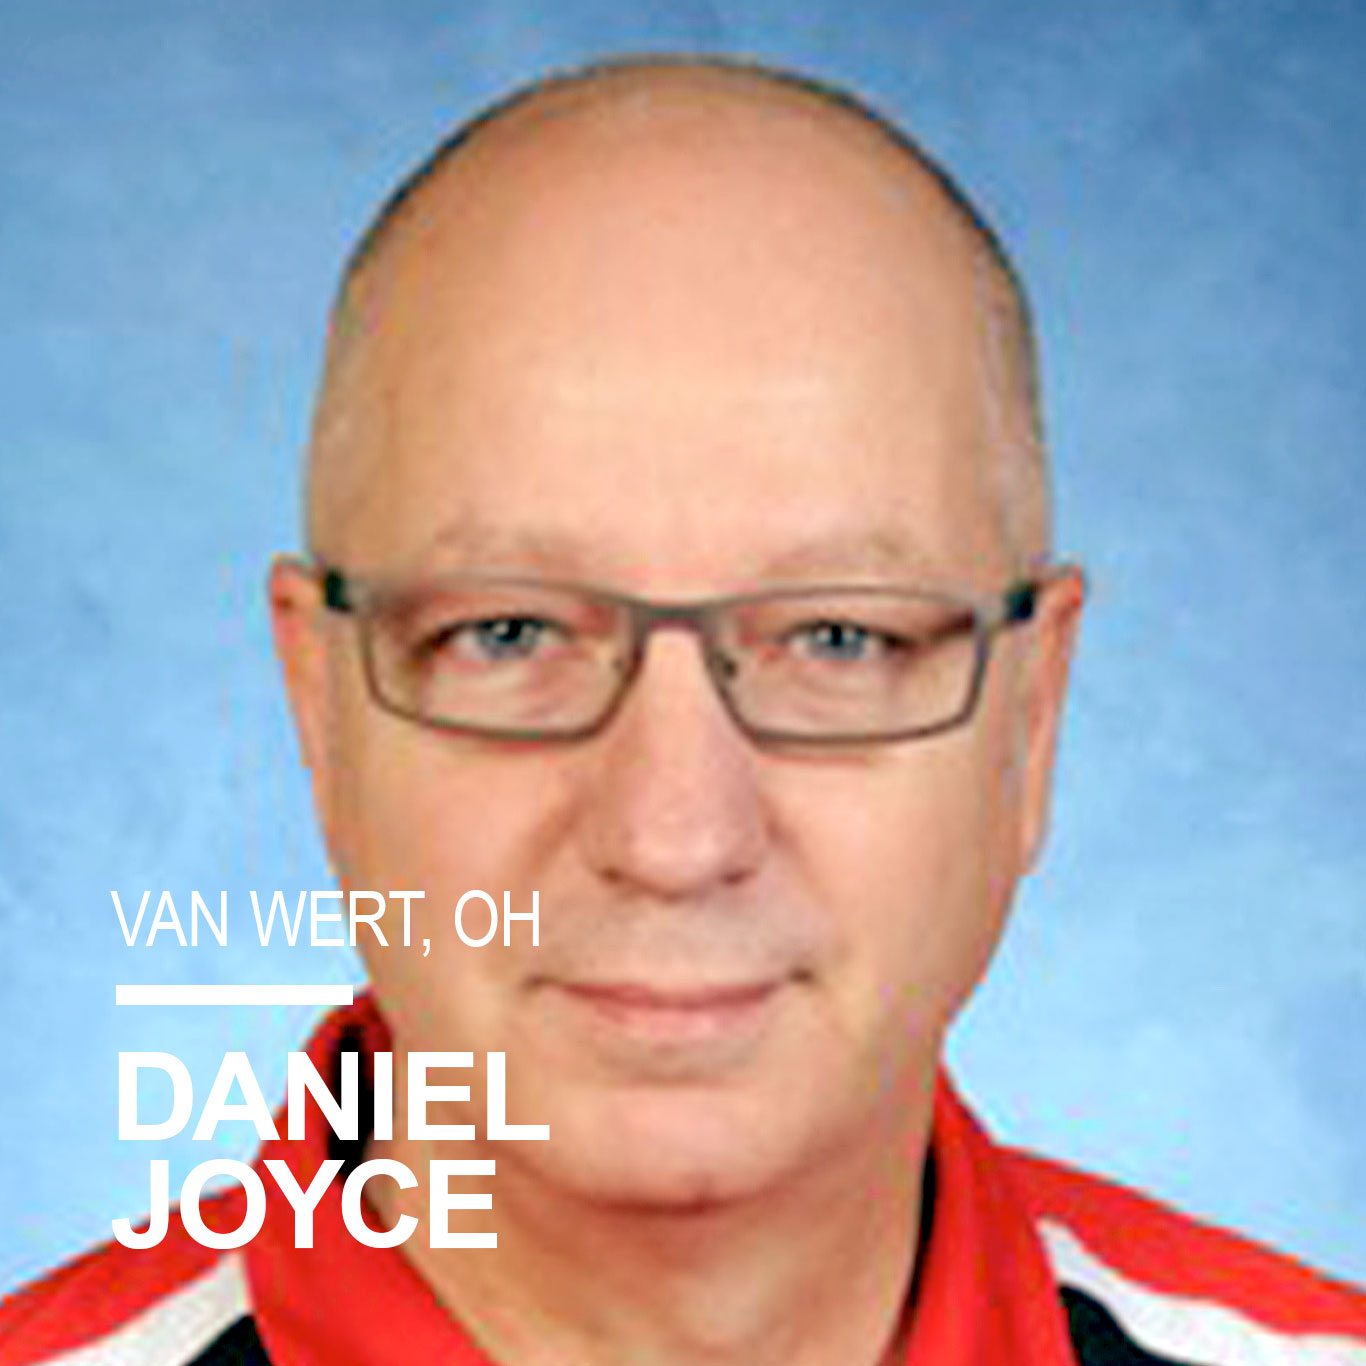 Daniel Joyce, a STEM instructor at the Vantage Career Center in Van Wert, OH, has a bachelor of science in Zoology, a postgrad certificate in Math and Science Education, and a master’s in Curriculum Design and Instruction. He’s passionate about hands-on programming and problem-solving and created the new STEM Robotics and Drone Program at the Center. He’s also working on creating a drone training course that will directly connect his students to future careers. Daniel loves the fact that teaching brings a new and different challenge every day, and he embraces these new experiences.